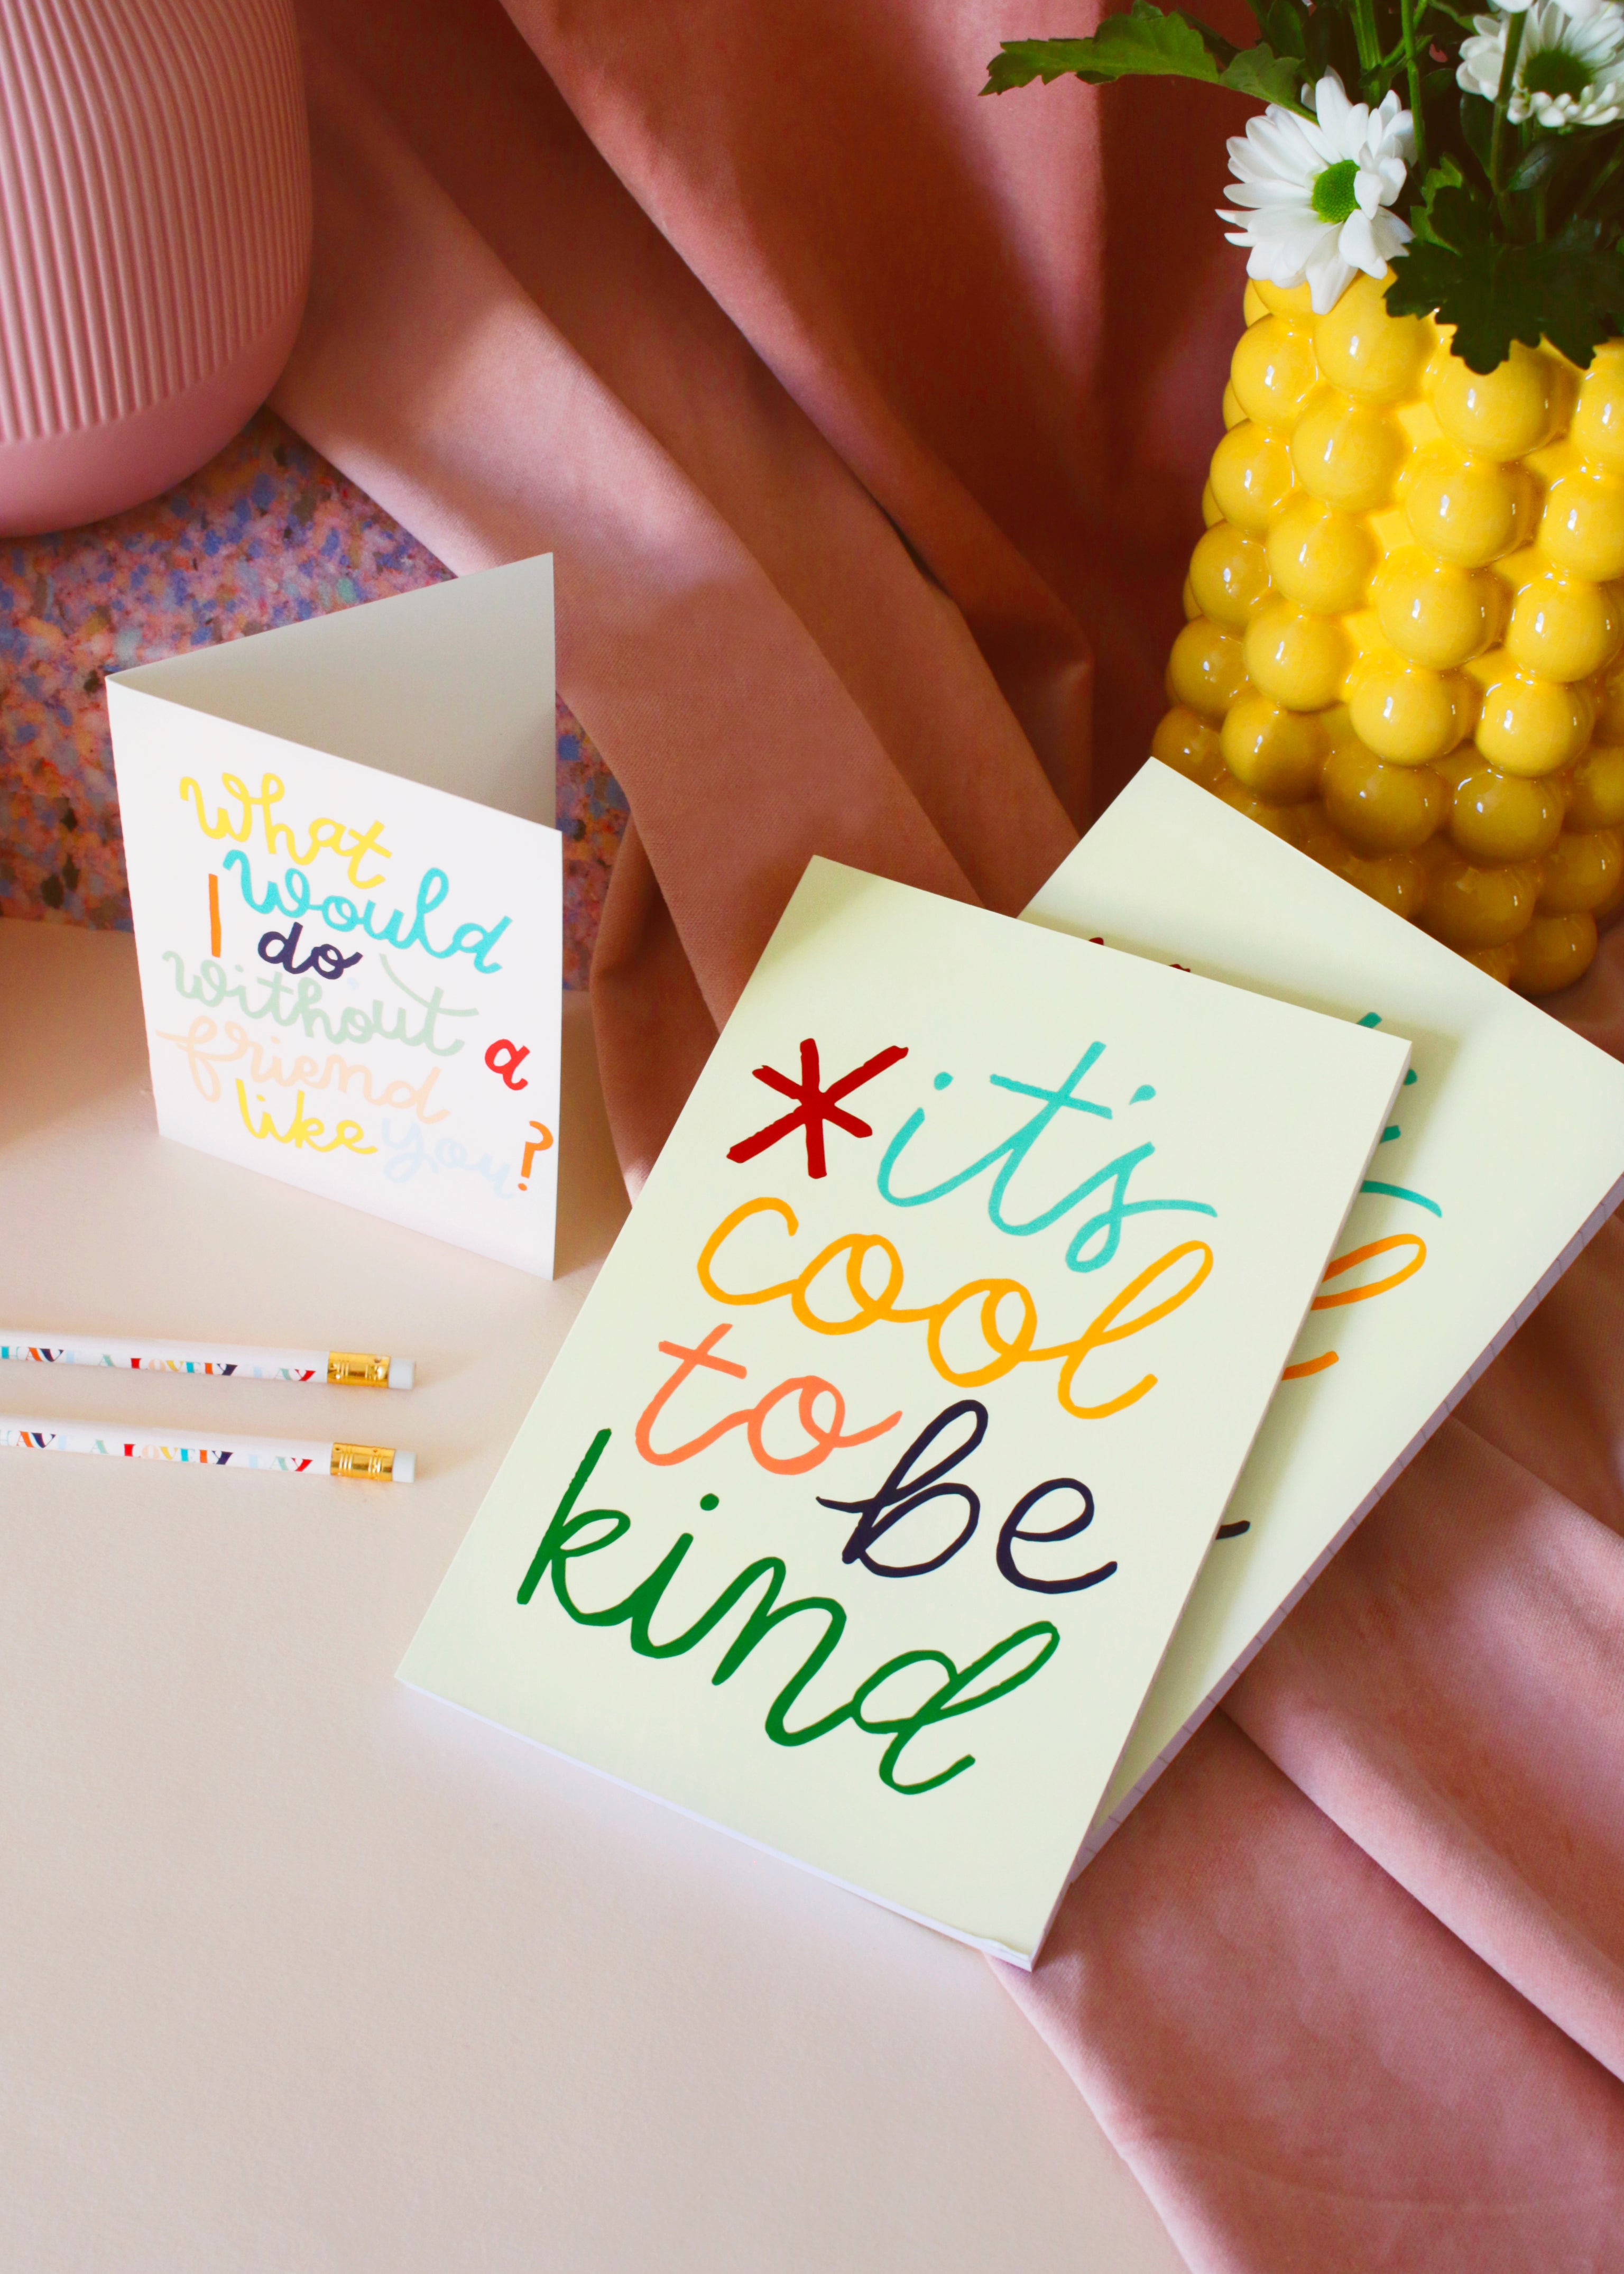 the It's cool to be kind notebook against some soft pink velvet